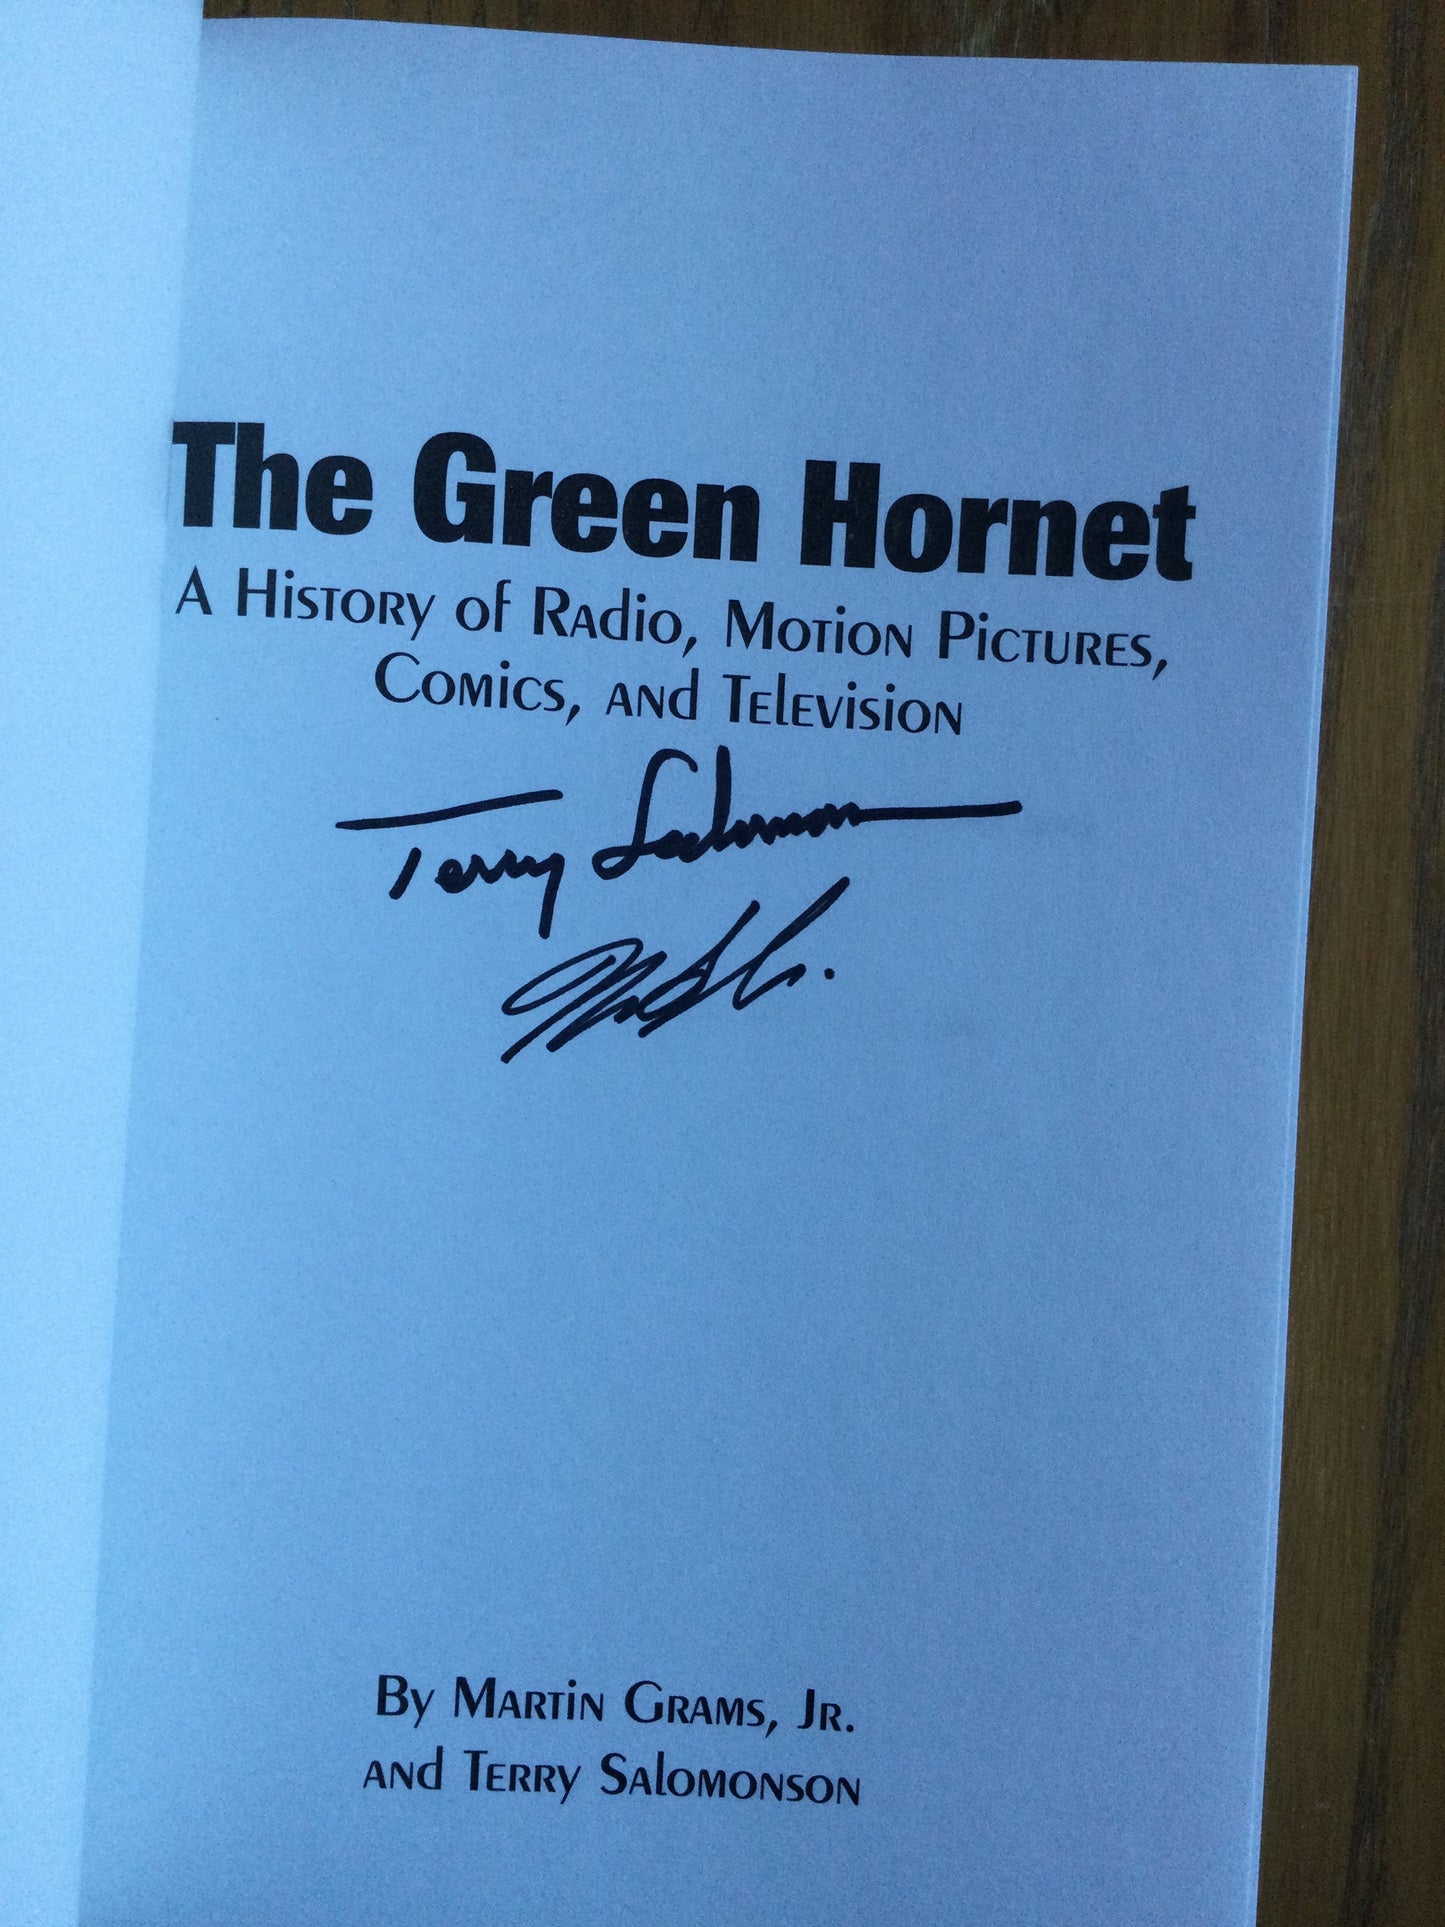 THE GREEN HORNET, two autographs book